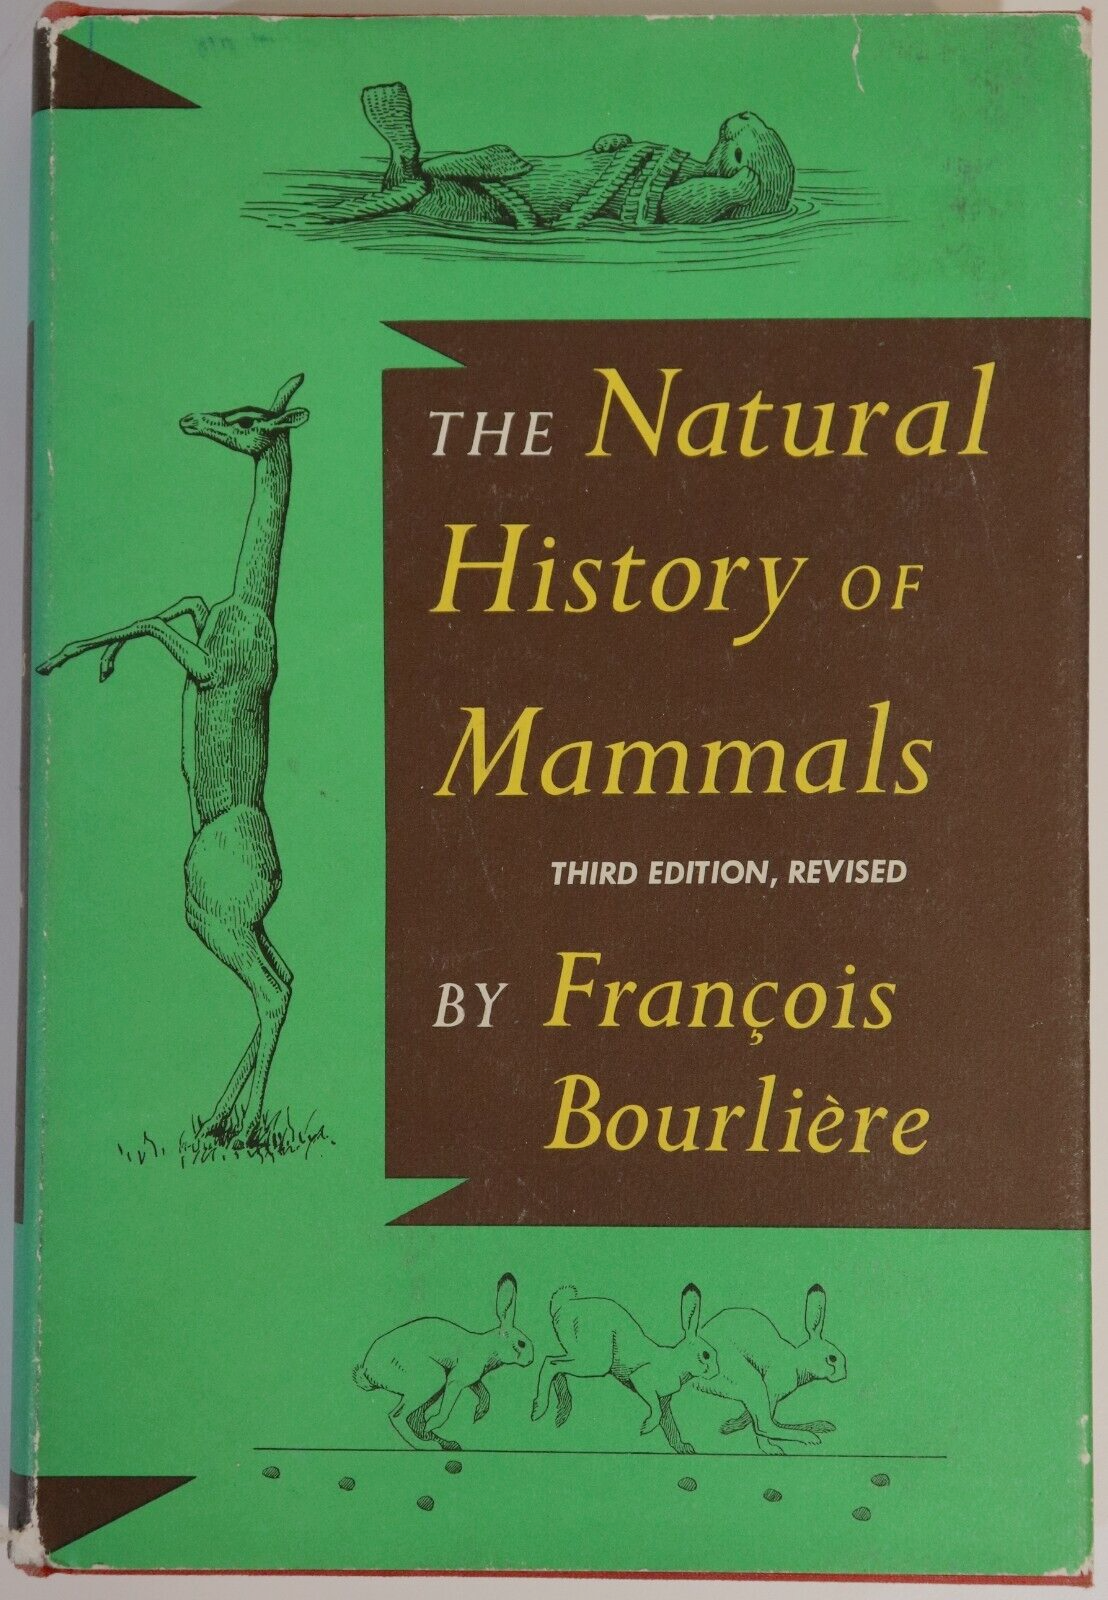 The Natural History Of Mammals by Francois Bourliere - 1970 - History Book